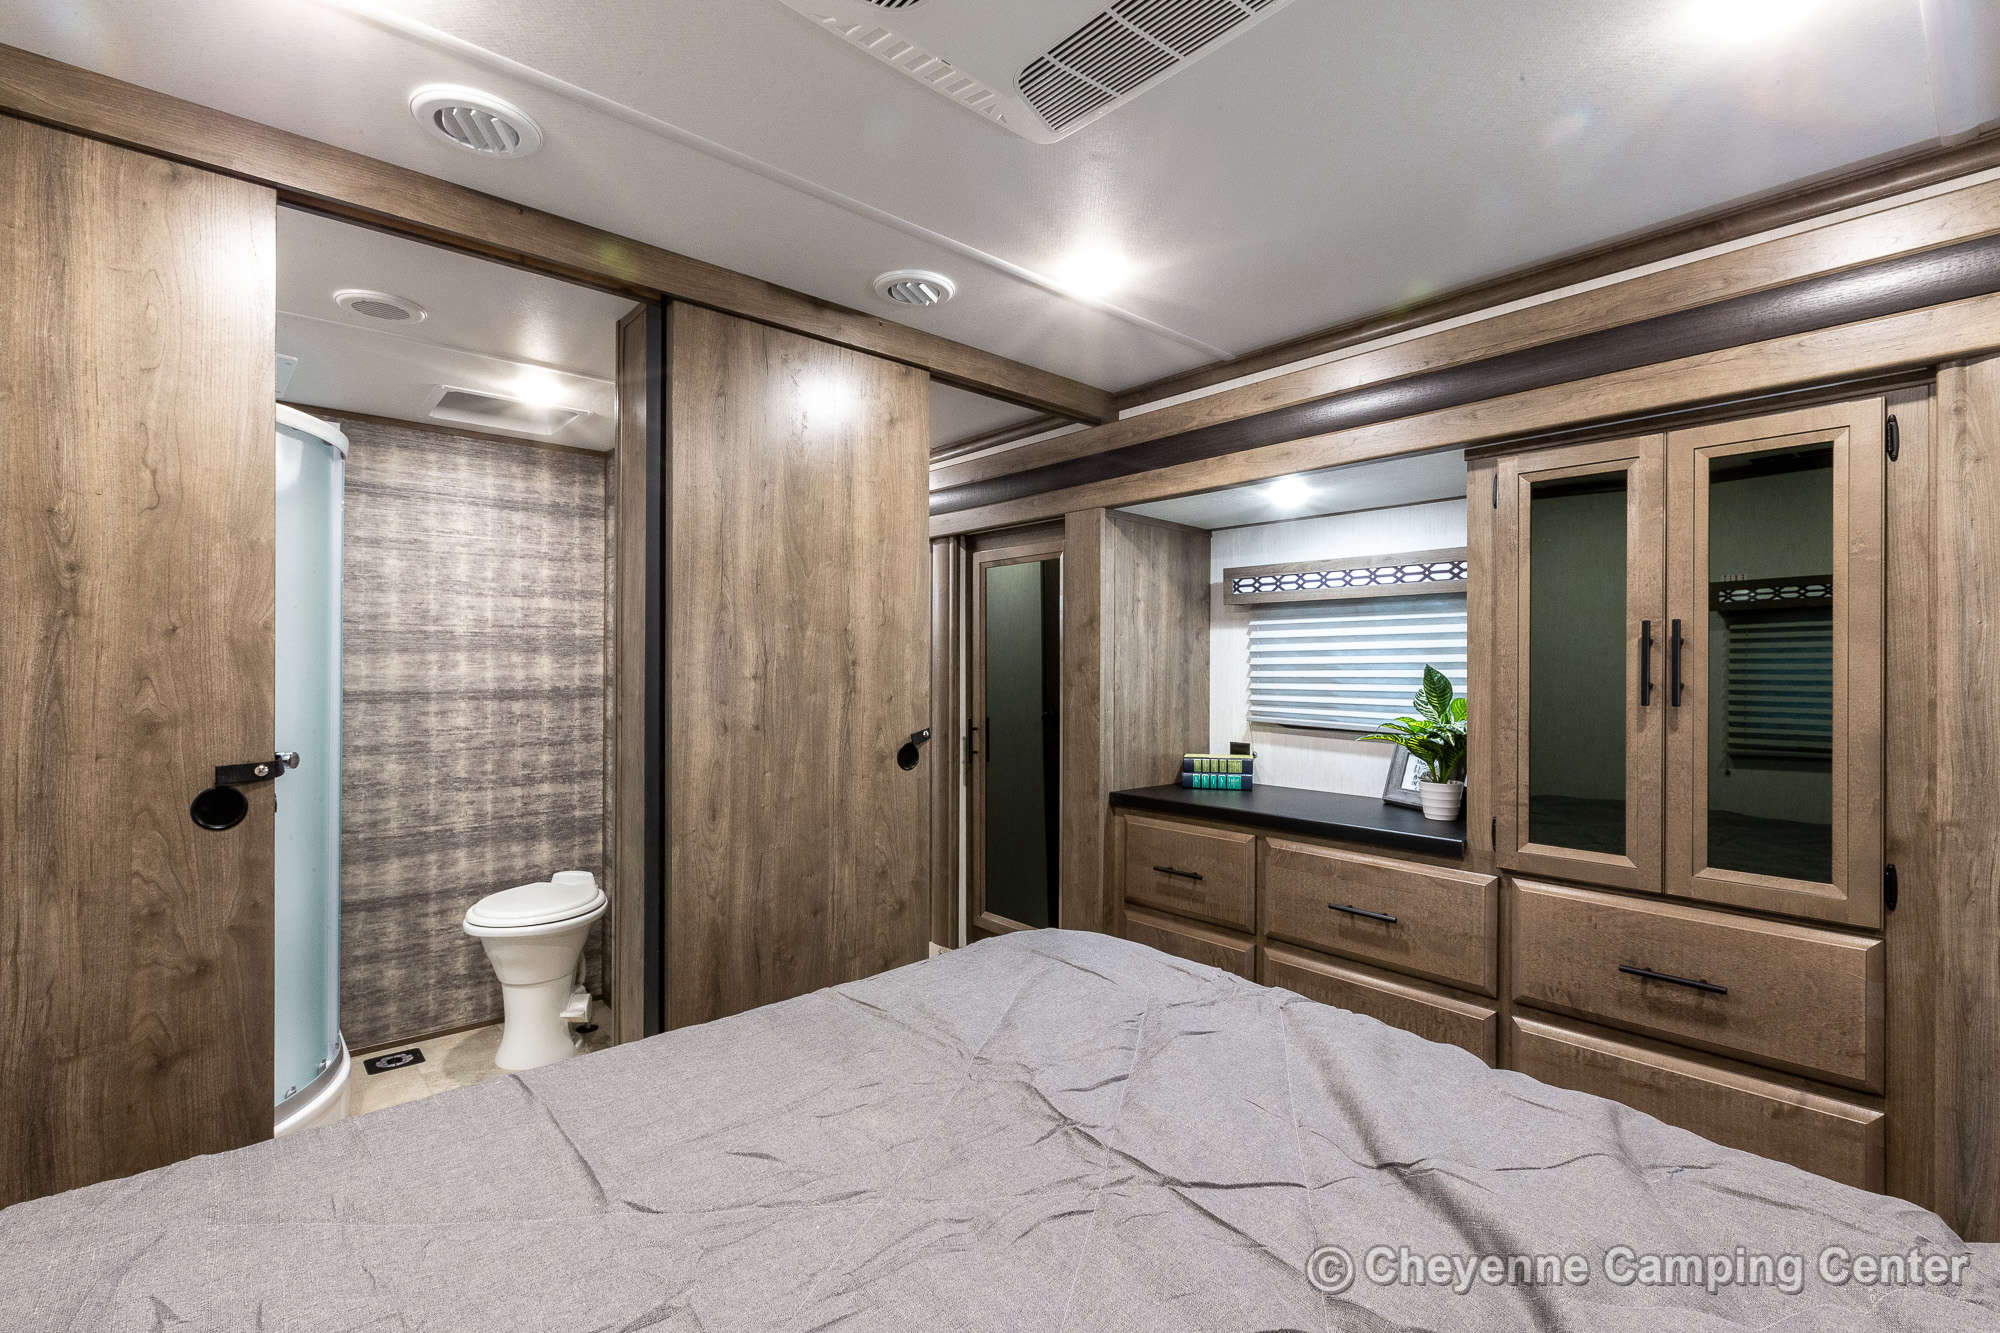 2022 Forest River Vengeance Rogue Armored 4007G2 Bunkhouse Toy Hauler Fifth Wheel Interior Image